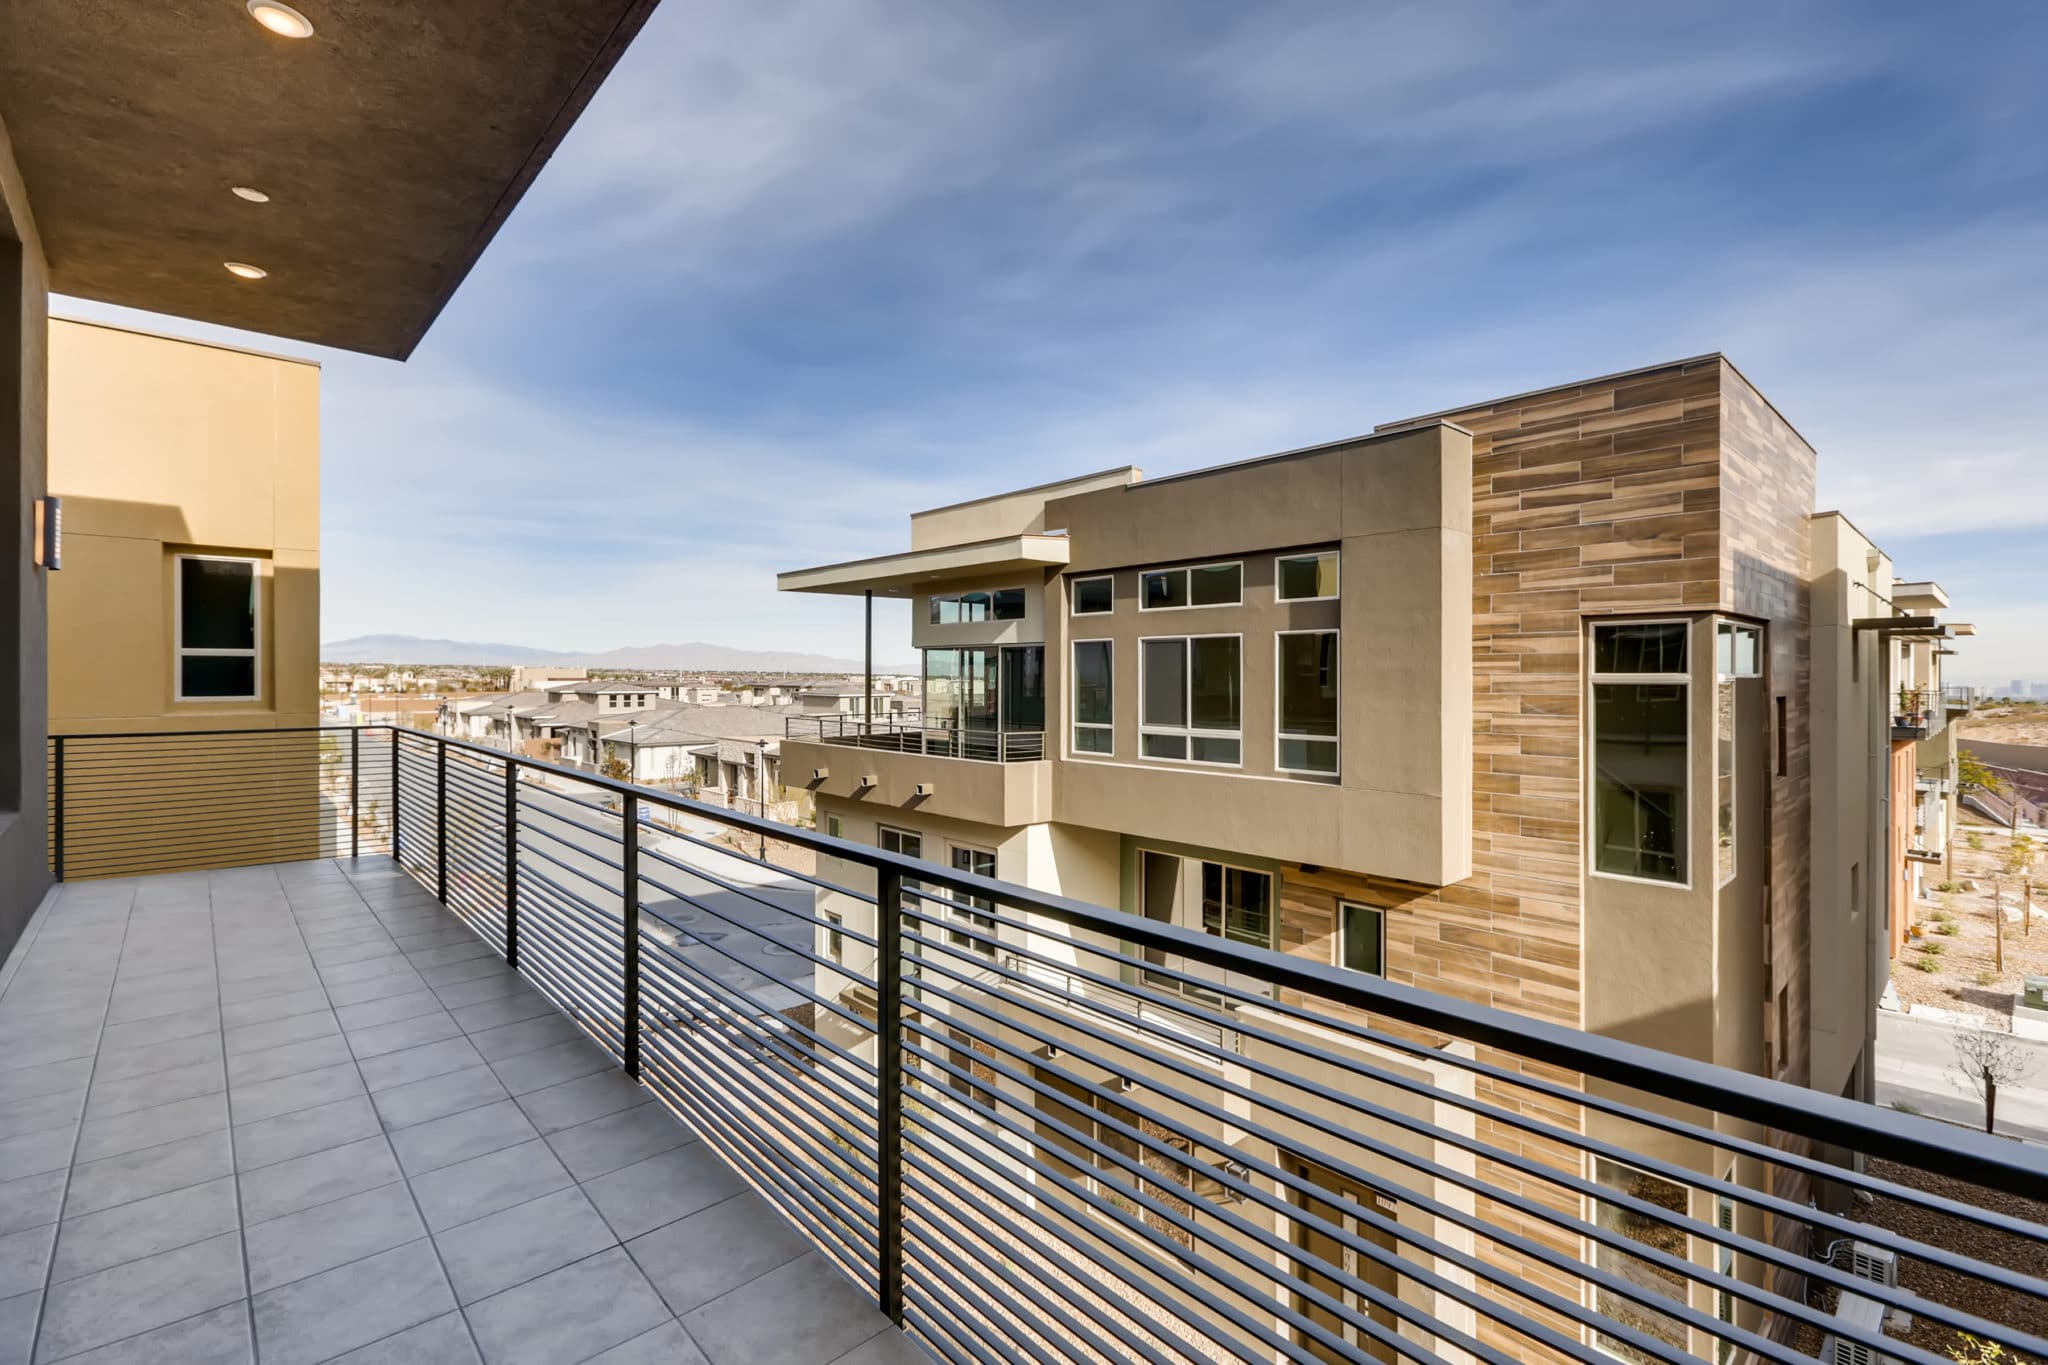 Balcony in Summit in Modern Collection in Trilogy by Shea Homes in South Square in Summerlin